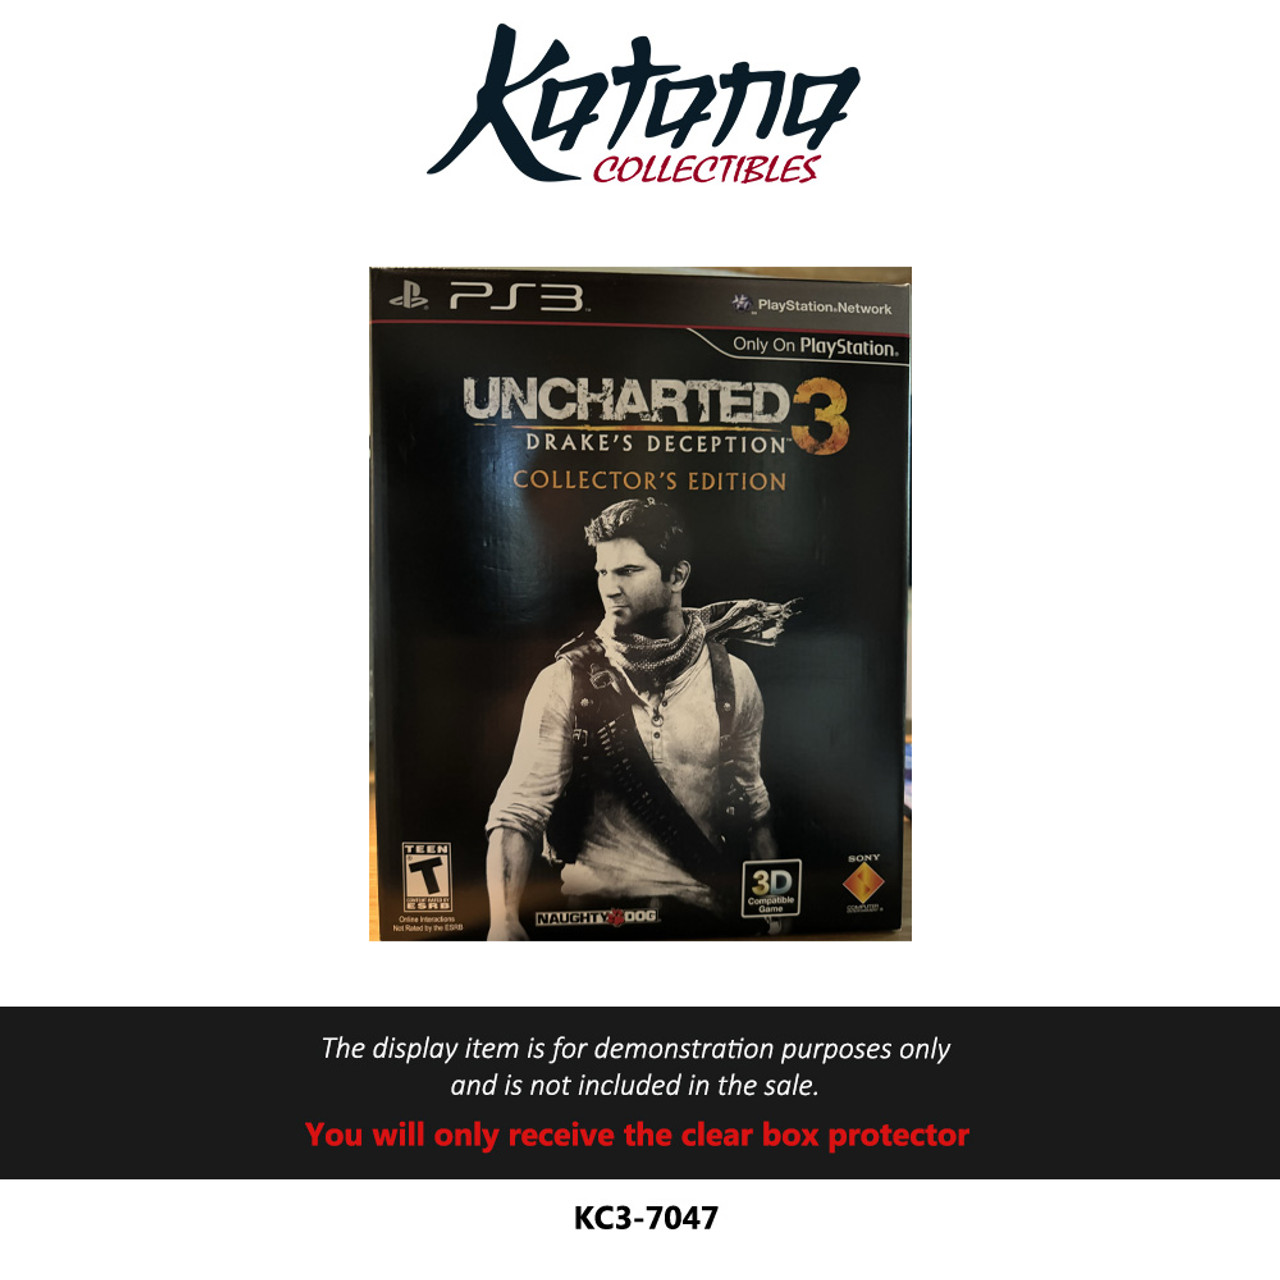 Katana Collectibles Protector For Uncharted 3: Drake's Deception Collector's Edition